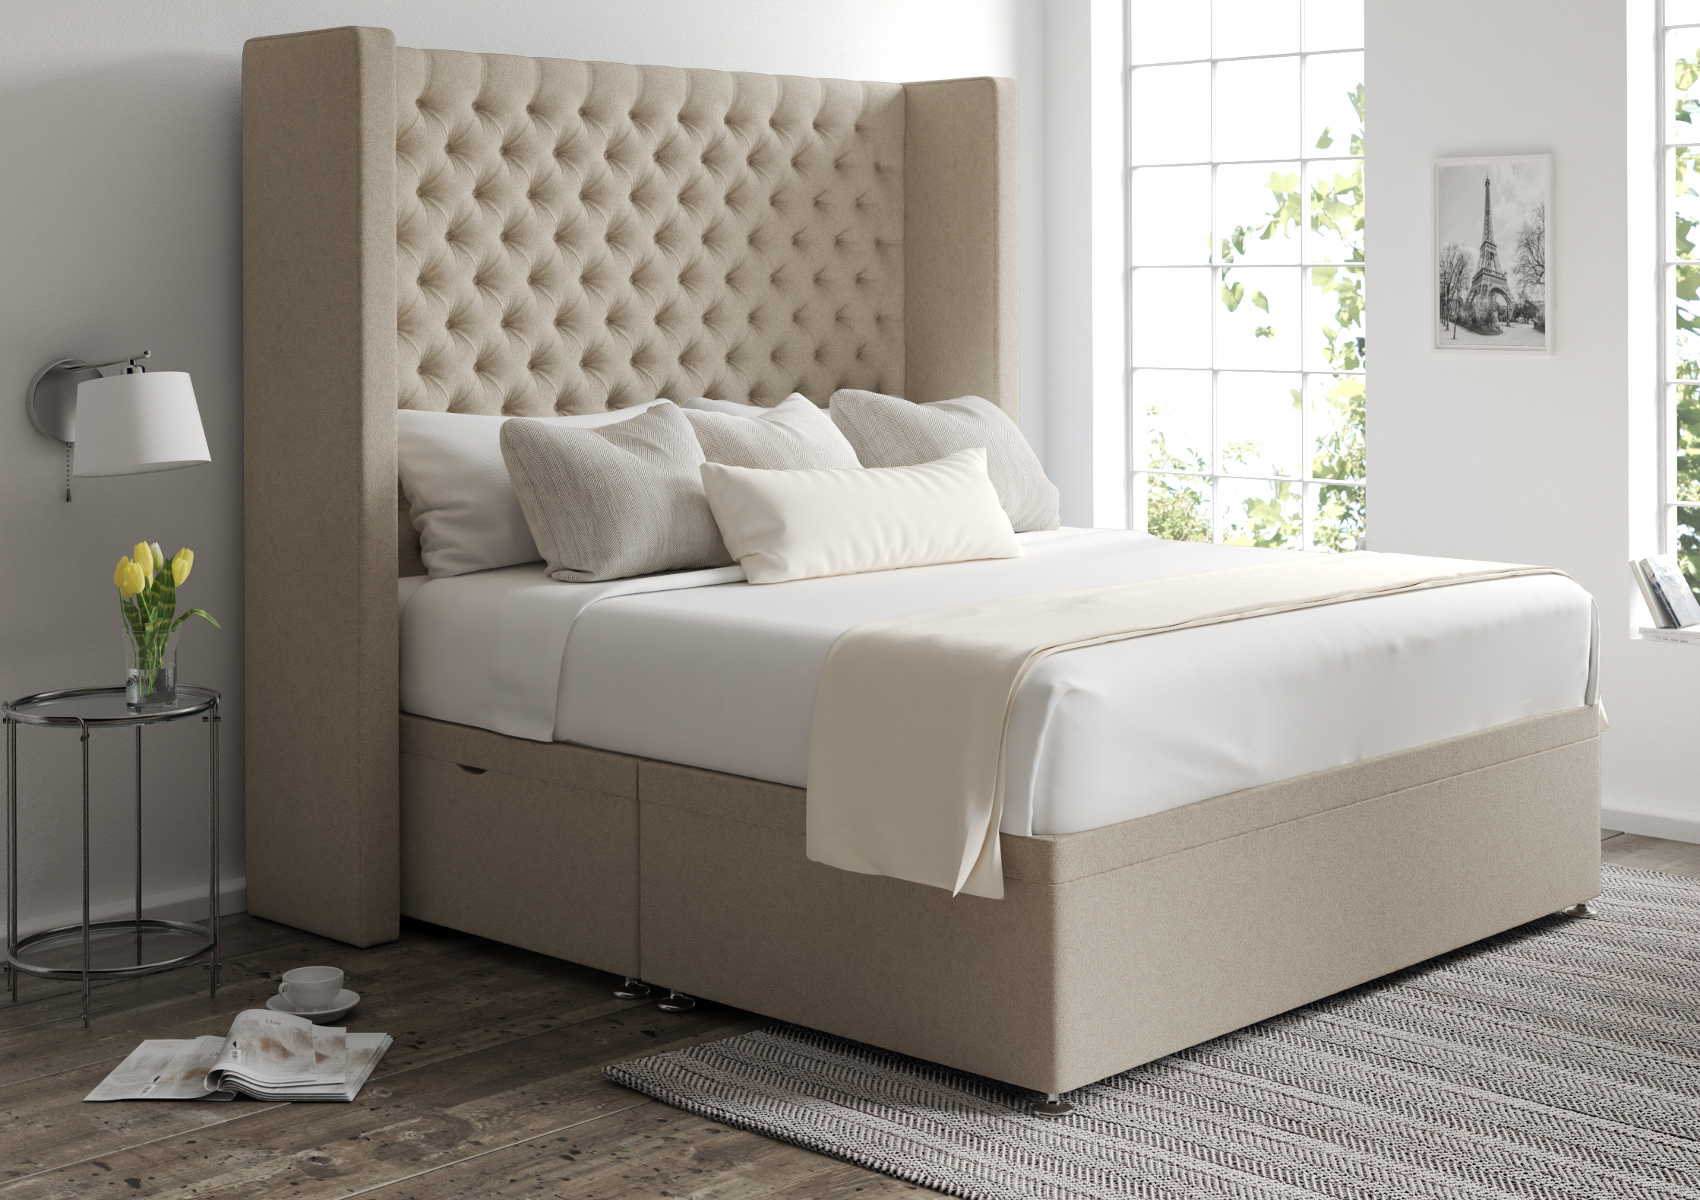 View Emma Arran Natural Upholstered King Size Ottoman Bed Time4Sleep information